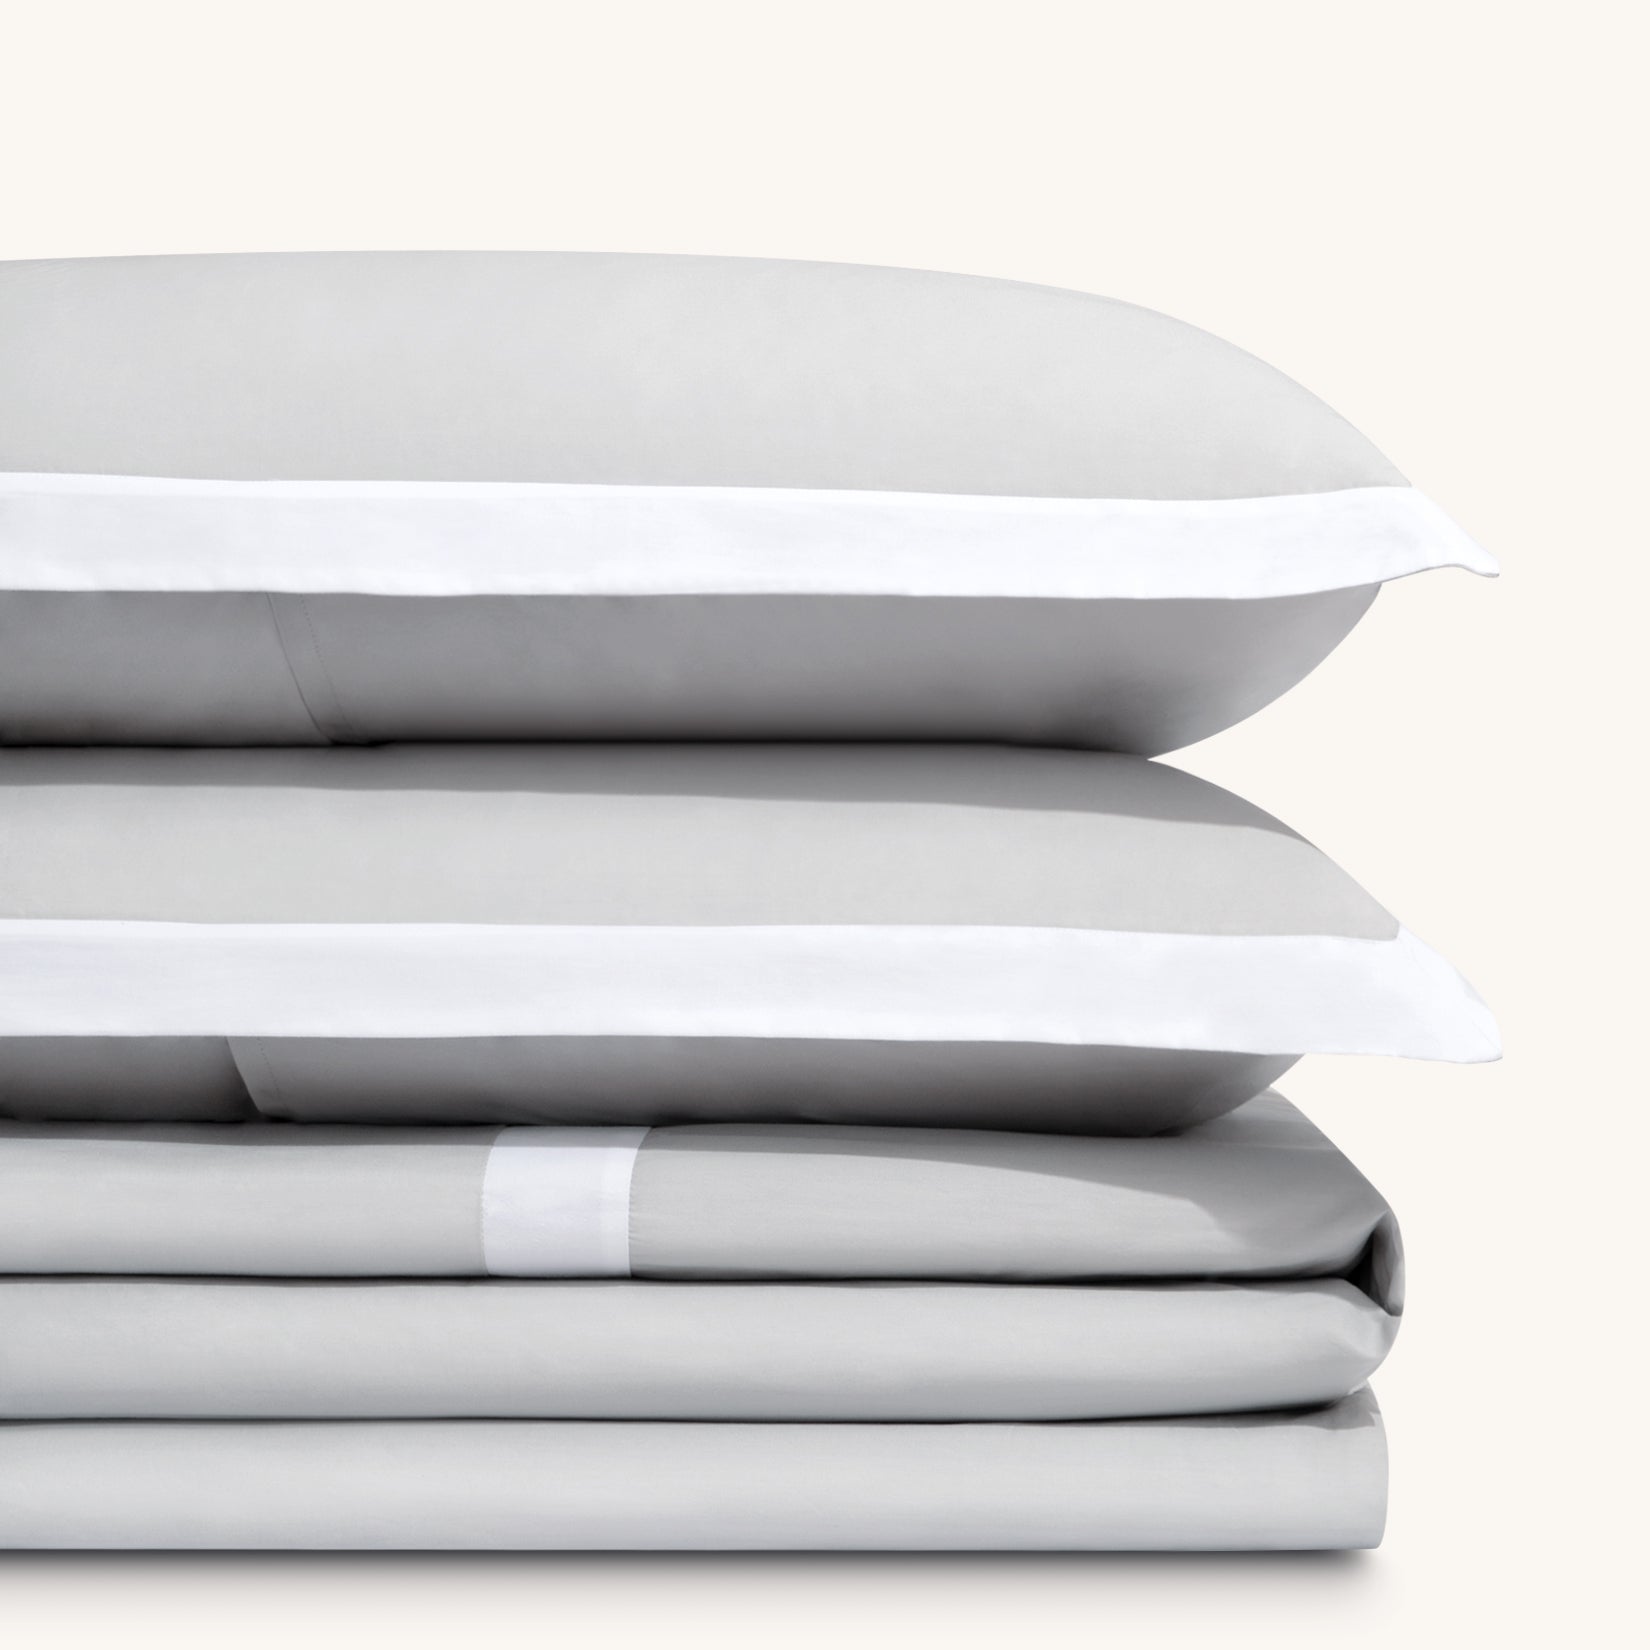 Paulina Foggy Gray 200 thread count combed cotton bed sheet set. Two white and gray pillows stacked on folded white and gray sheet set.Paulina Foggy Gray 200 thread count combed cotton duvet set. Two white and gray pillows stacked on folded white and gray duvet set.